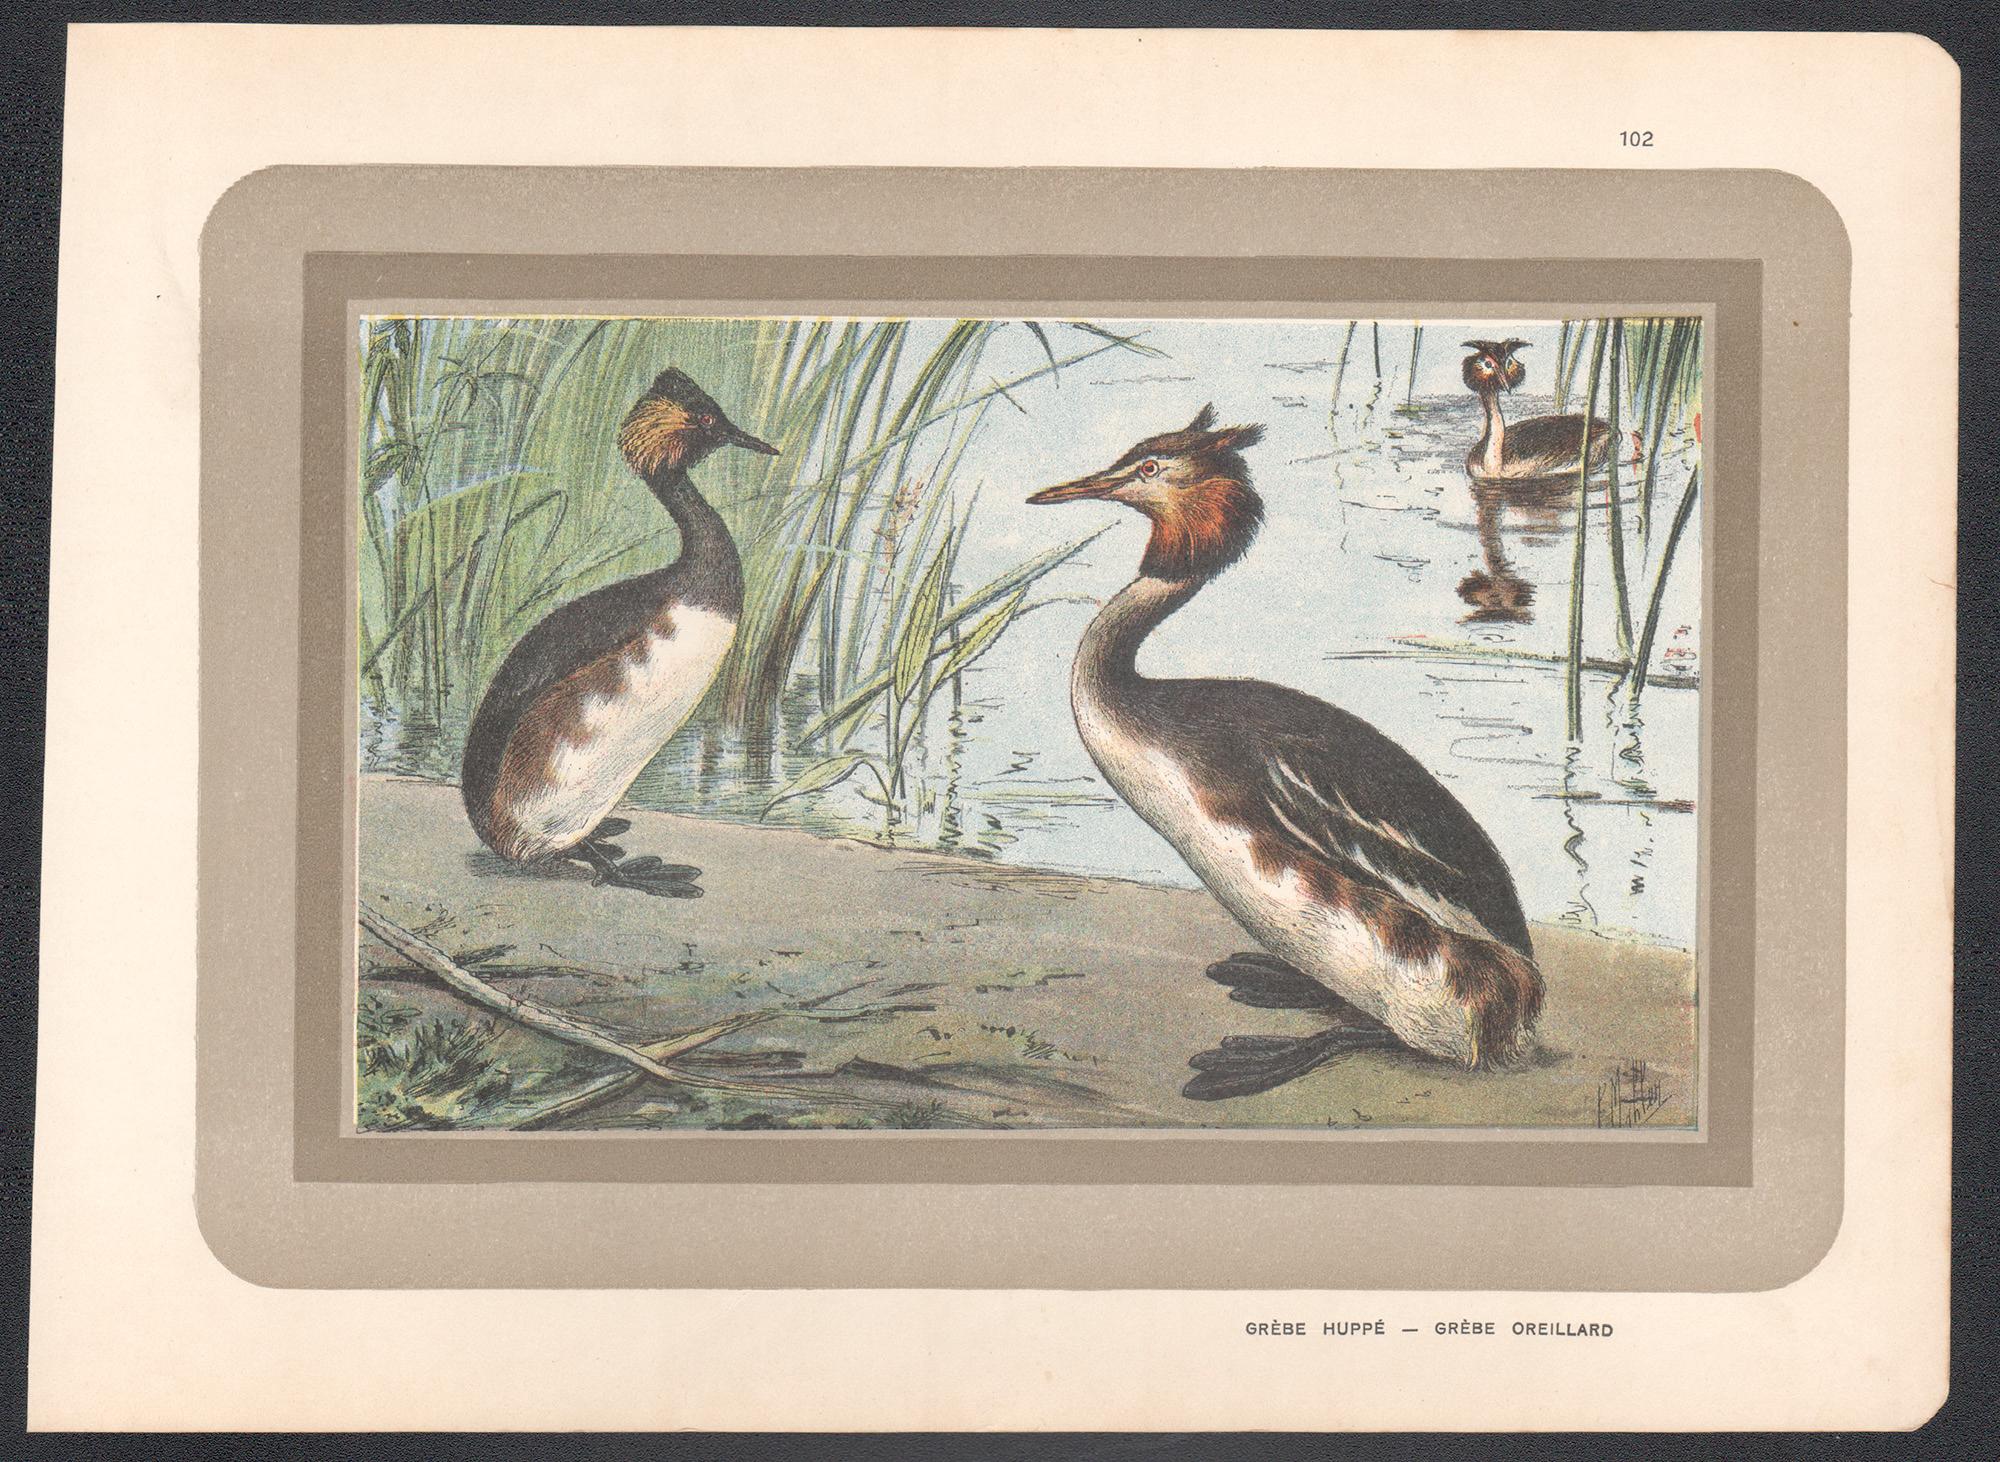 Great Crested Grebe, French antique natural history water bird art print - Print by Unknown